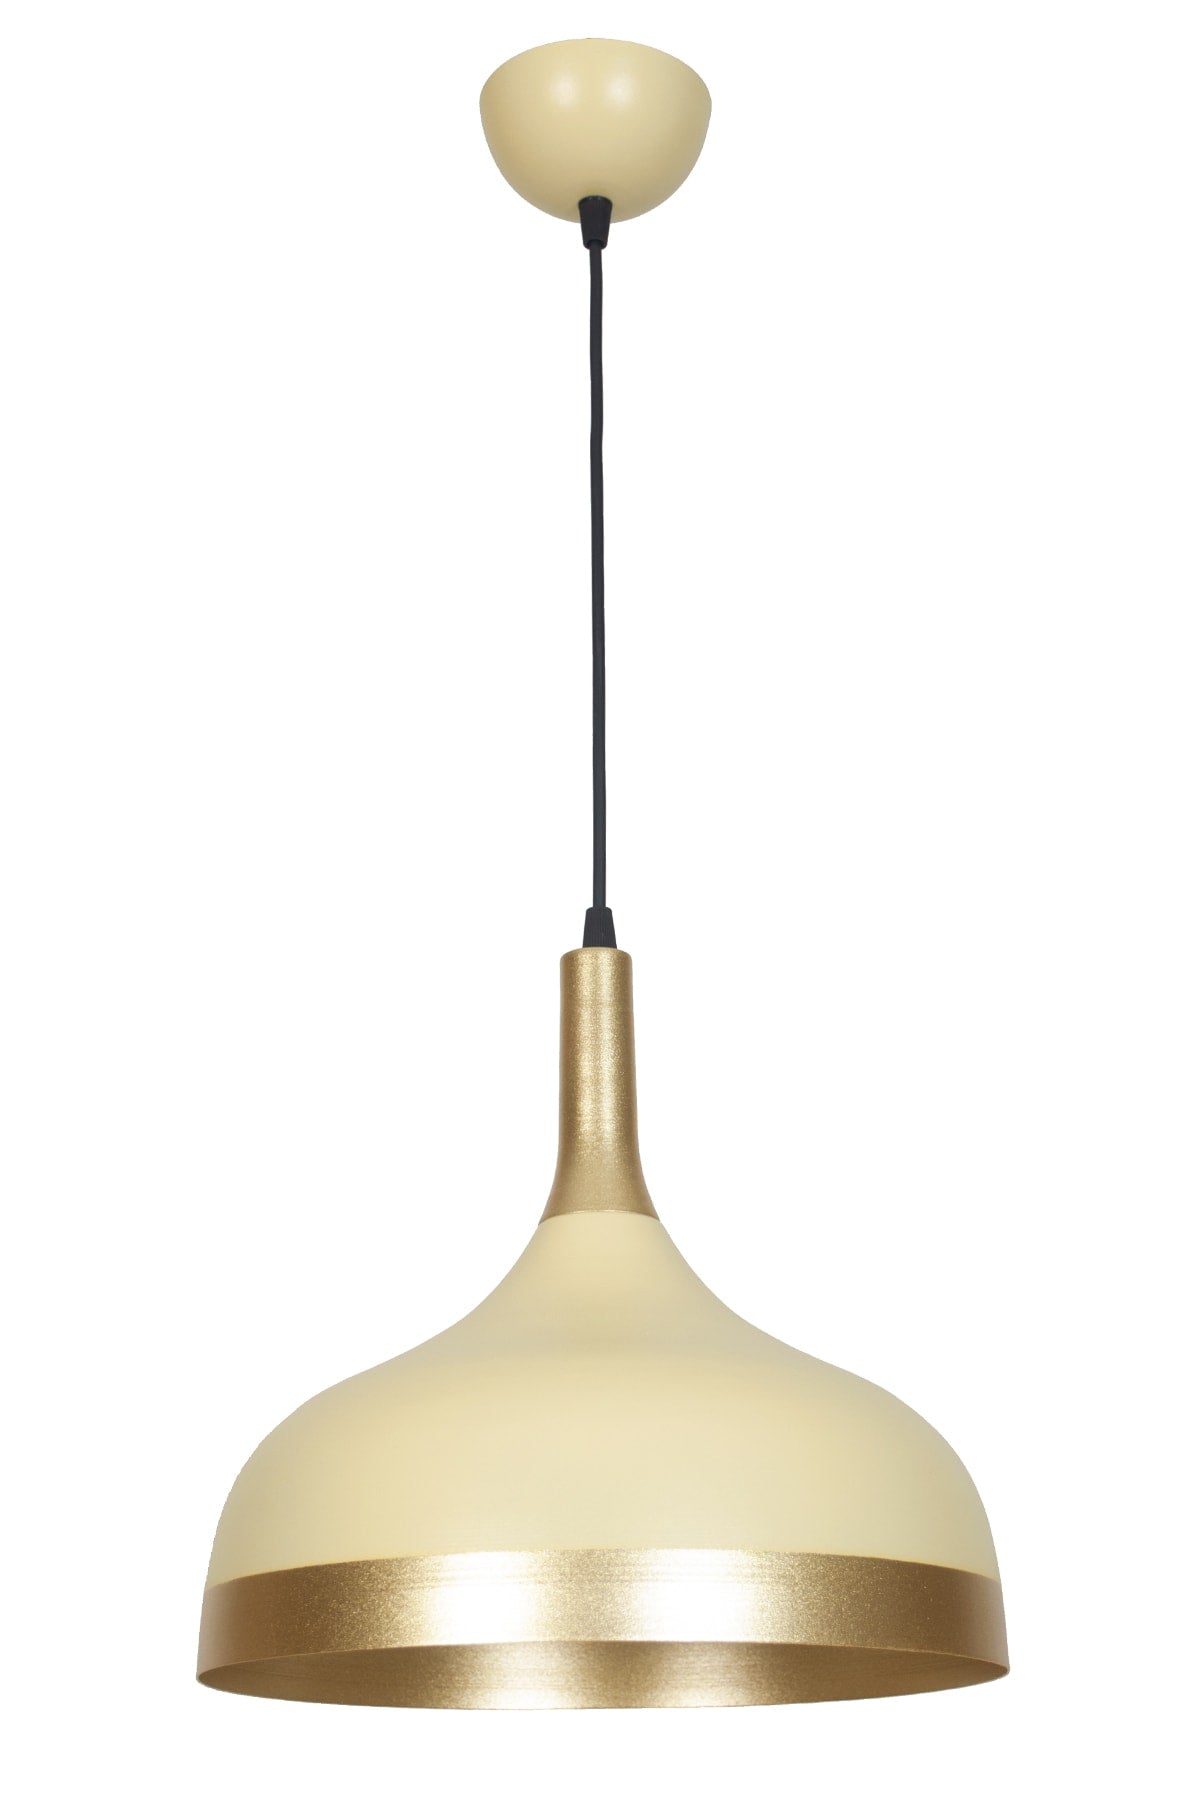 Cosmos Special Design Sports Modern Cream Color Gold Detailed Metal Cafe-Kitchen Single Pendant Lamp Chandelier